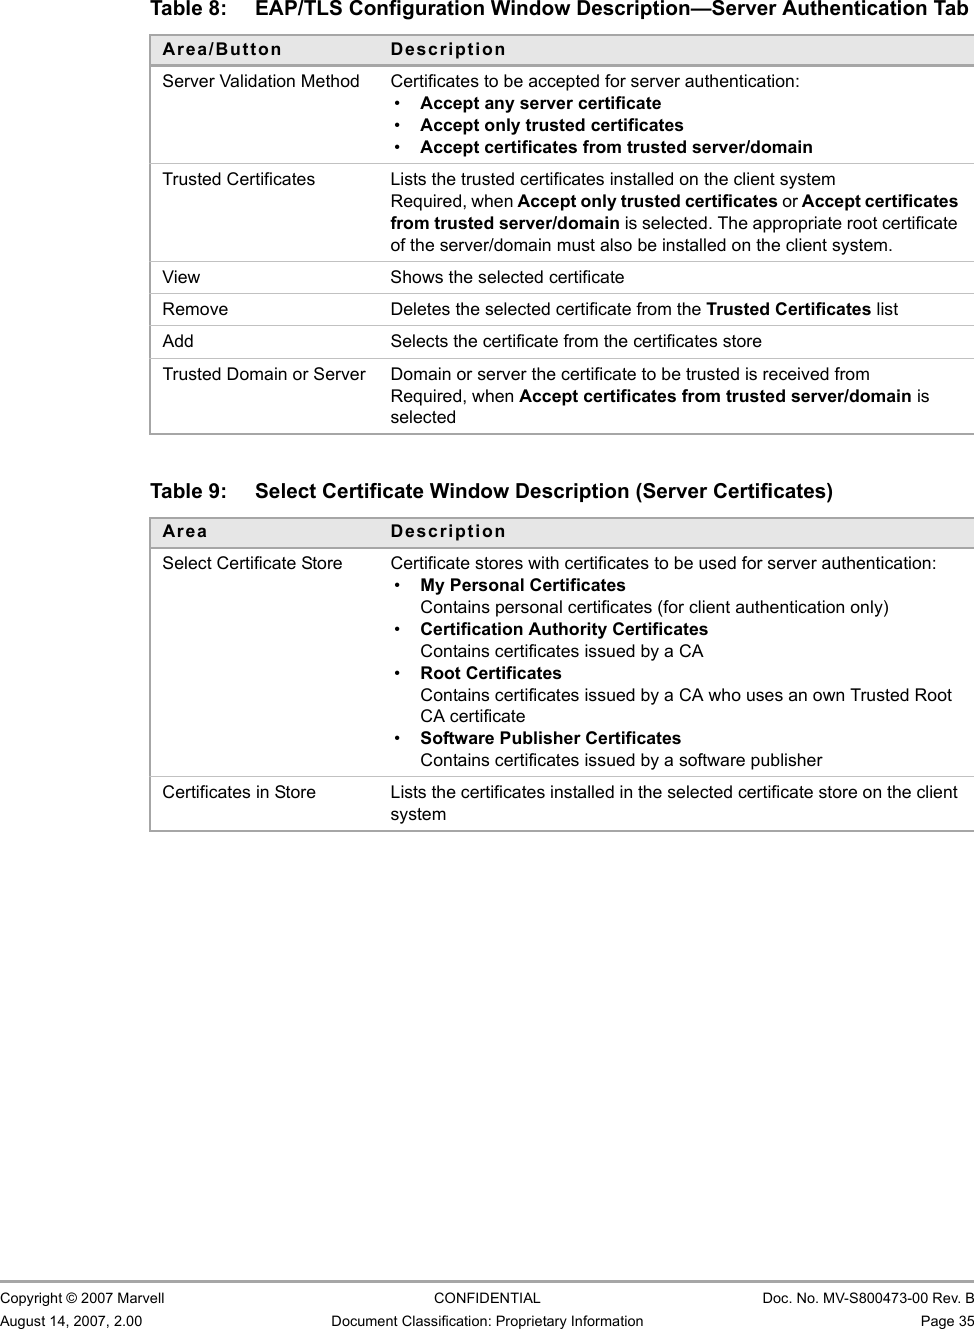 Marvell Wireless Configuration Utility User InterfaceProfile Manager Tab                         Copyright © 2007 Marvell CONFIDENTIAL Doc. No. MV-S800473-00 Rev. BAugust 14, 2007, 2.00 Document Classification: Proprietary Information Page 35                                                   Table 8: EAP/TLS Configuration Window Description—Server Authentication TabArea/Button DescriptionServer Validation Method Certificates to be accepted for server authentication:•Accept any server certificate•Accept only trusted certificates•Accept certificates from trusted server/domainTrusted Certificates Lists the trusted certificates installed on the client systemRequired, when Accept only trusted certificates or Accept certificates from trusted server/domain is selected. The appropriate root certificate of the server/domain must also be installed on the client system.View Shows the selected certificateRemove Deletes the selected certificate from the Trusted Certificates listAdd Selects the certificate from the certificates storeTrusted Domain or Server Domain or server the certificate to be trusted is received fromRequired, when Accept certificates from trusted server/domain is selectedTable 9: Select Certificate Window Description (Server Certificates)Area DescriptionSelect Certificate Store Certificate stores with certificates to be used for server authentication:•My Personal CertificatesContains personal certificates (for client authentication only)•Certification Authority CertificatesContains certificates issued by a CA•Root CertificatesContains certificates issued by a CA who uses an own Trusted Root CA certificate•Software Publisher CertificatesContains certificates issued by a software publisherCertificates in Store Lists the certificates installed in the selected certificate store on the client system